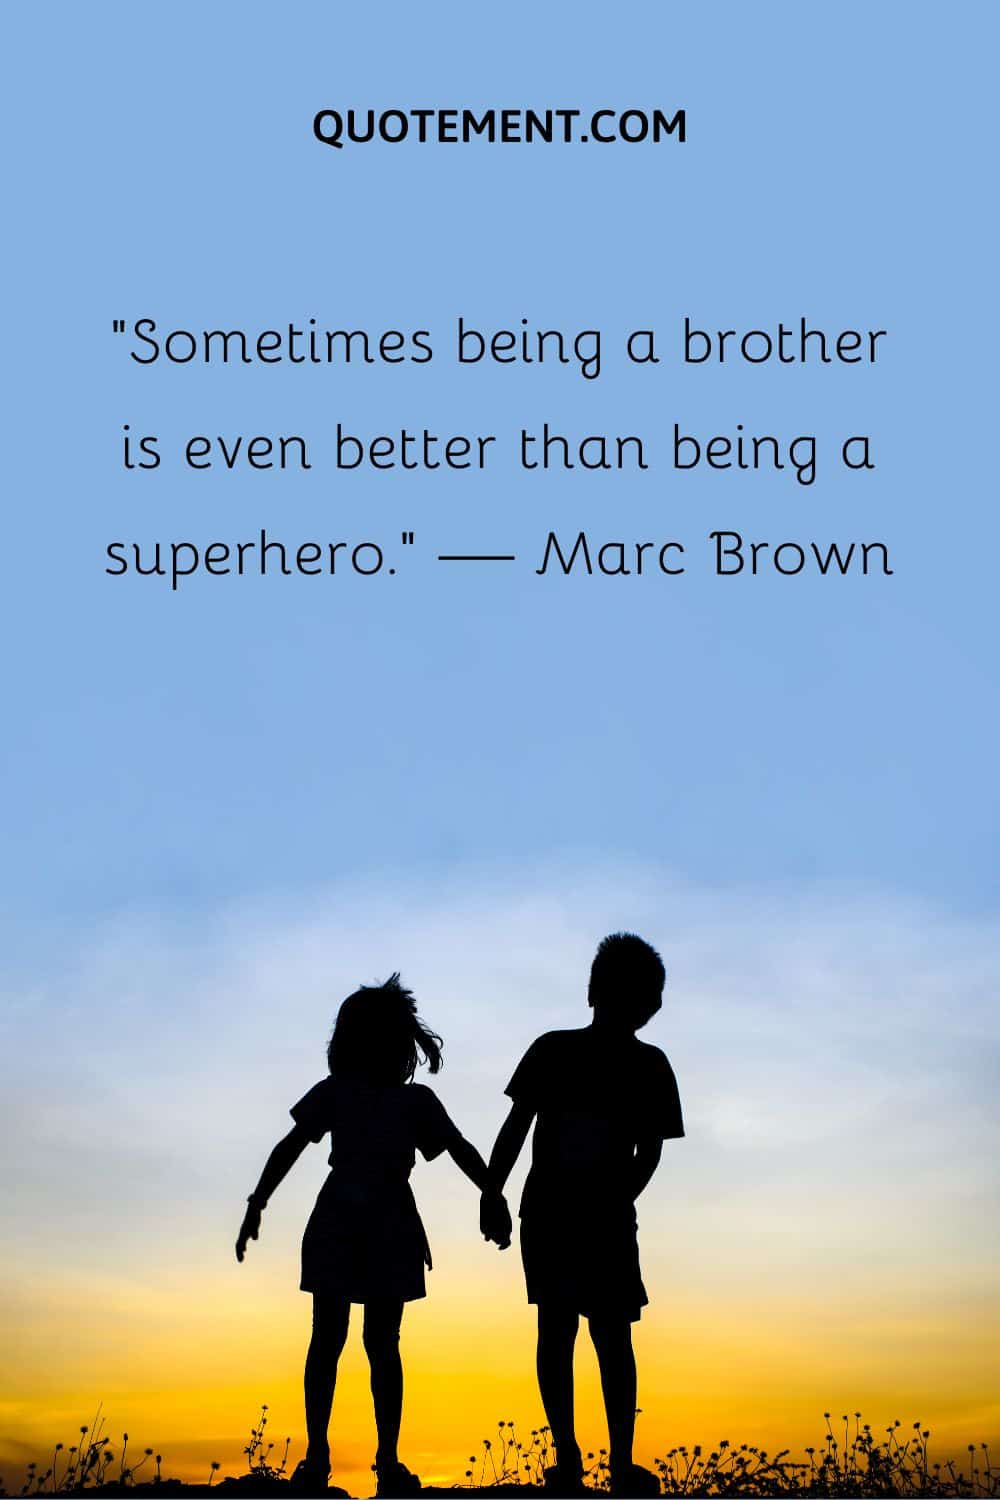 “Sometimes being a brother is even better than being a superhero.” — Marc Brown